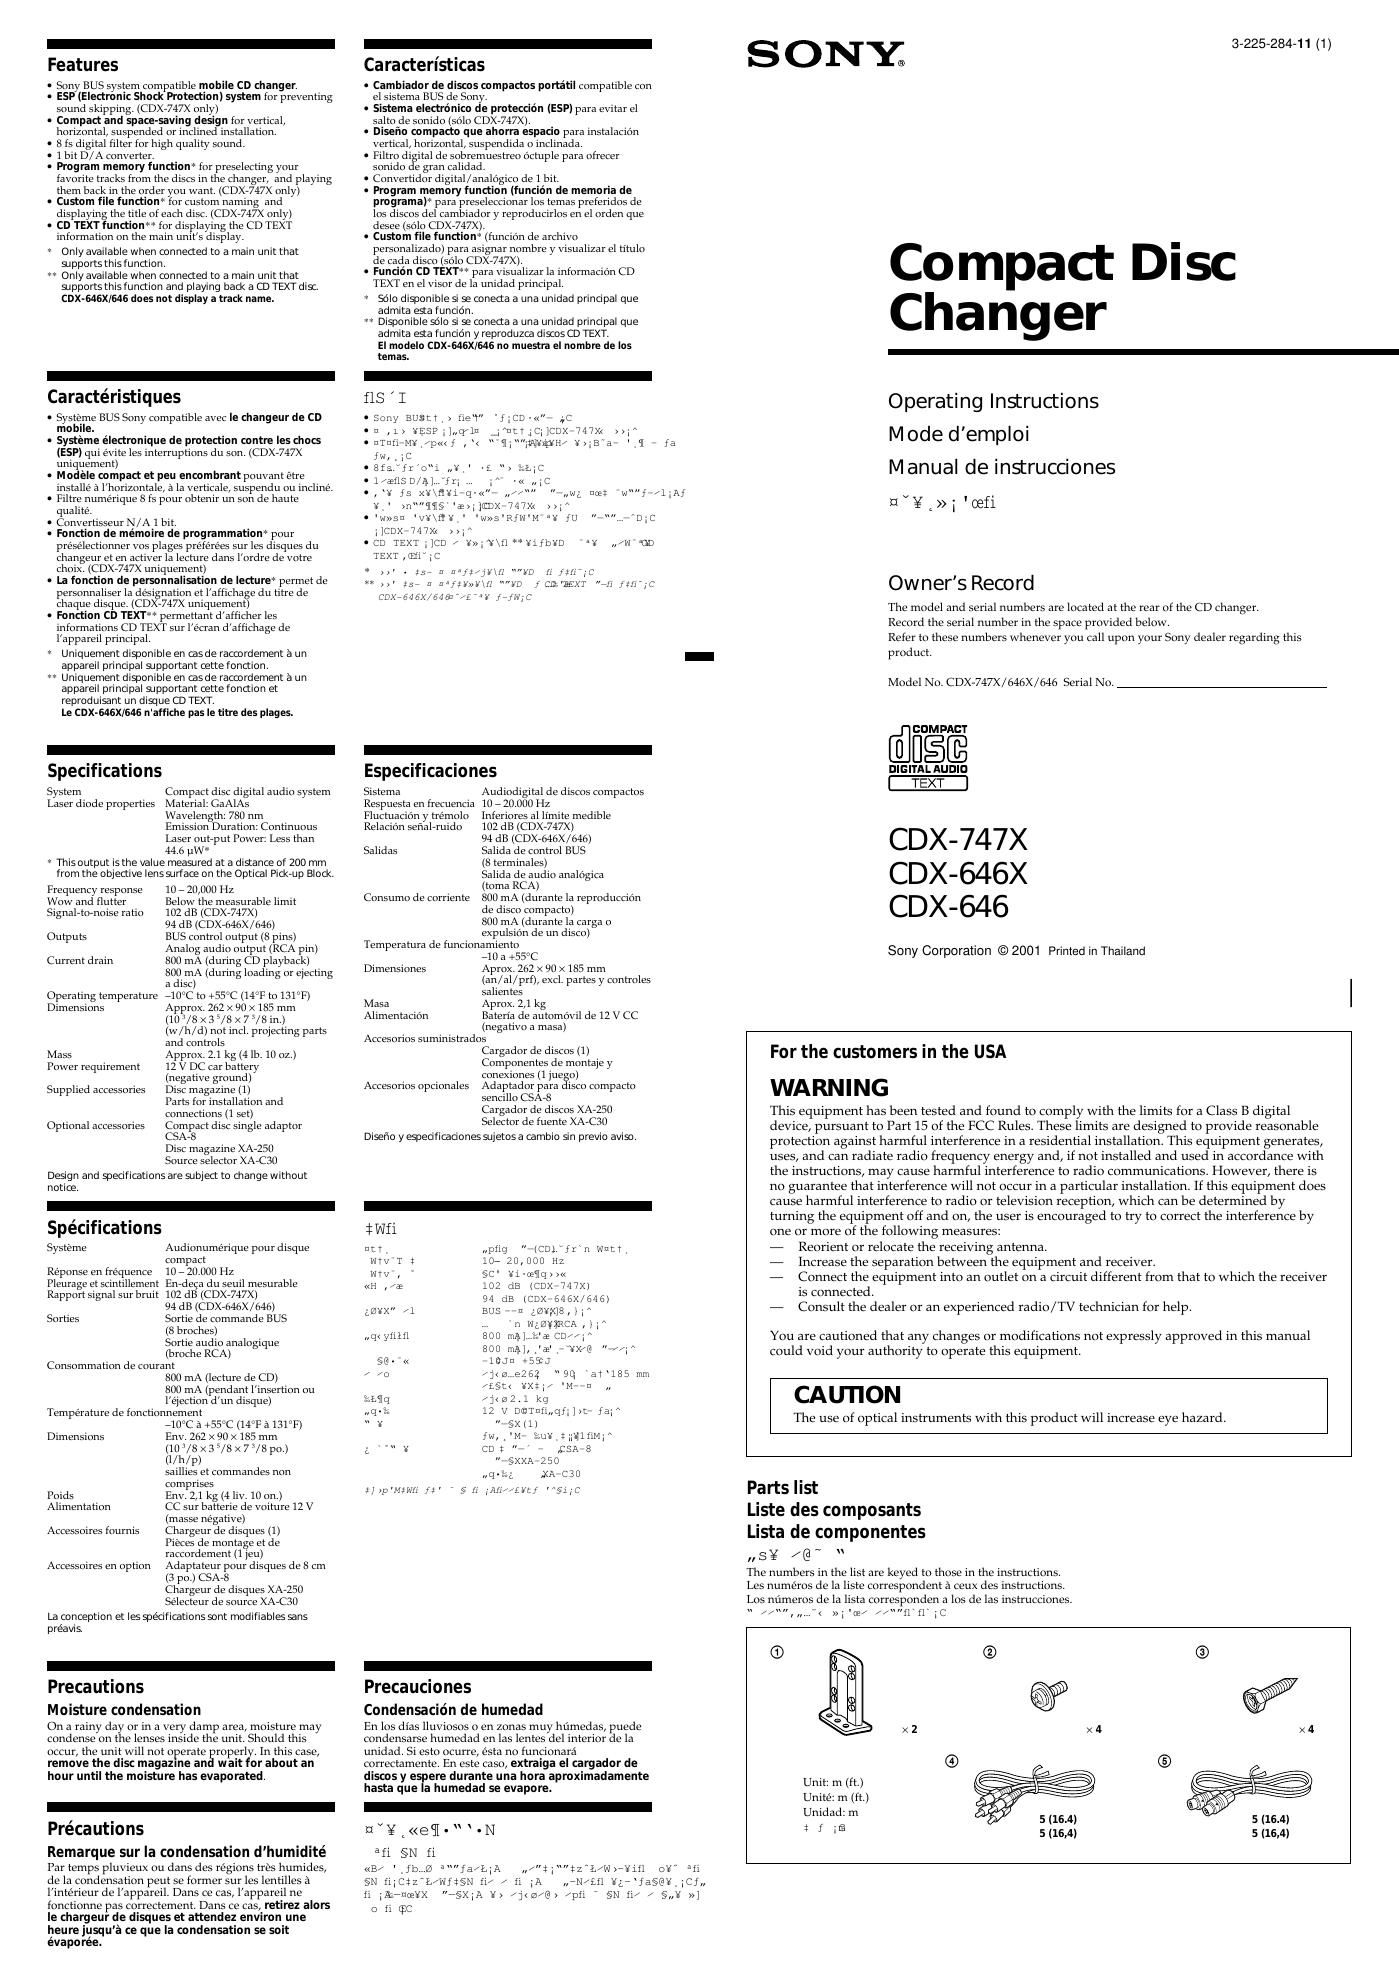 sony cdx 646 owners manual